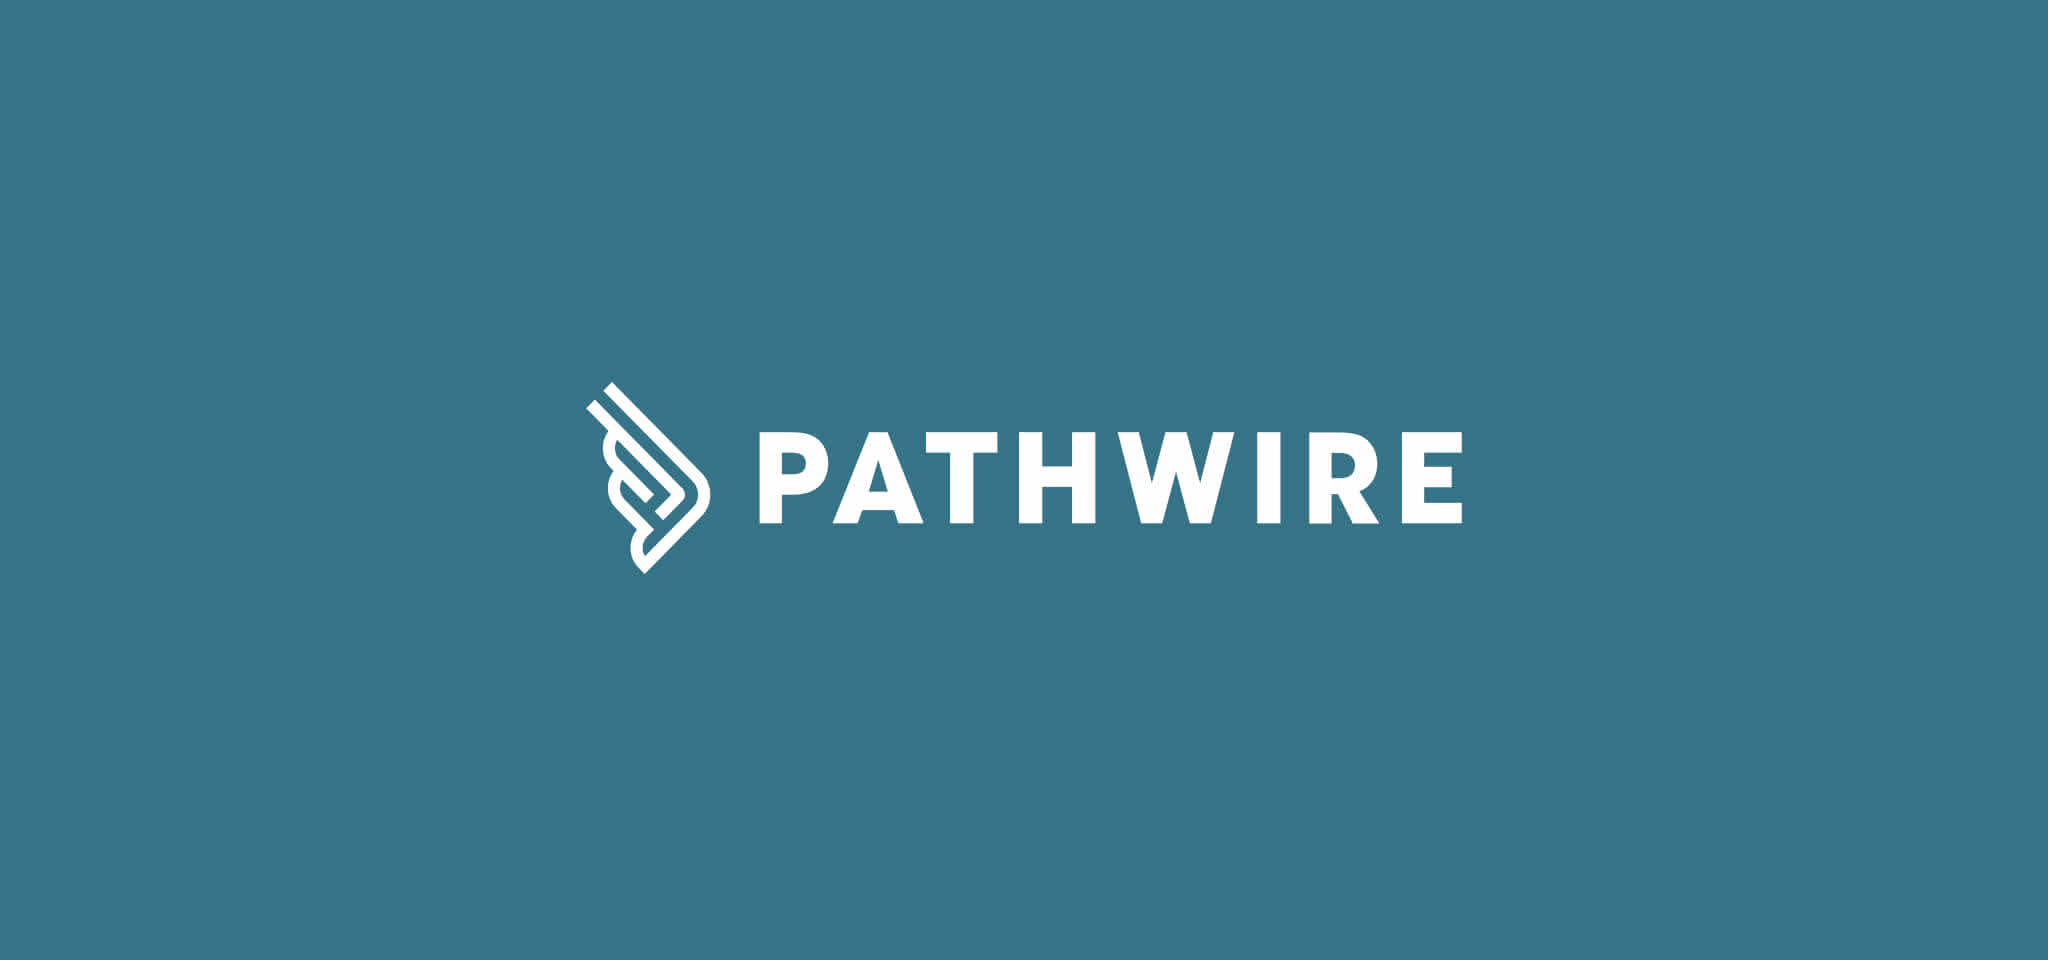 Pathwire Logo and Title